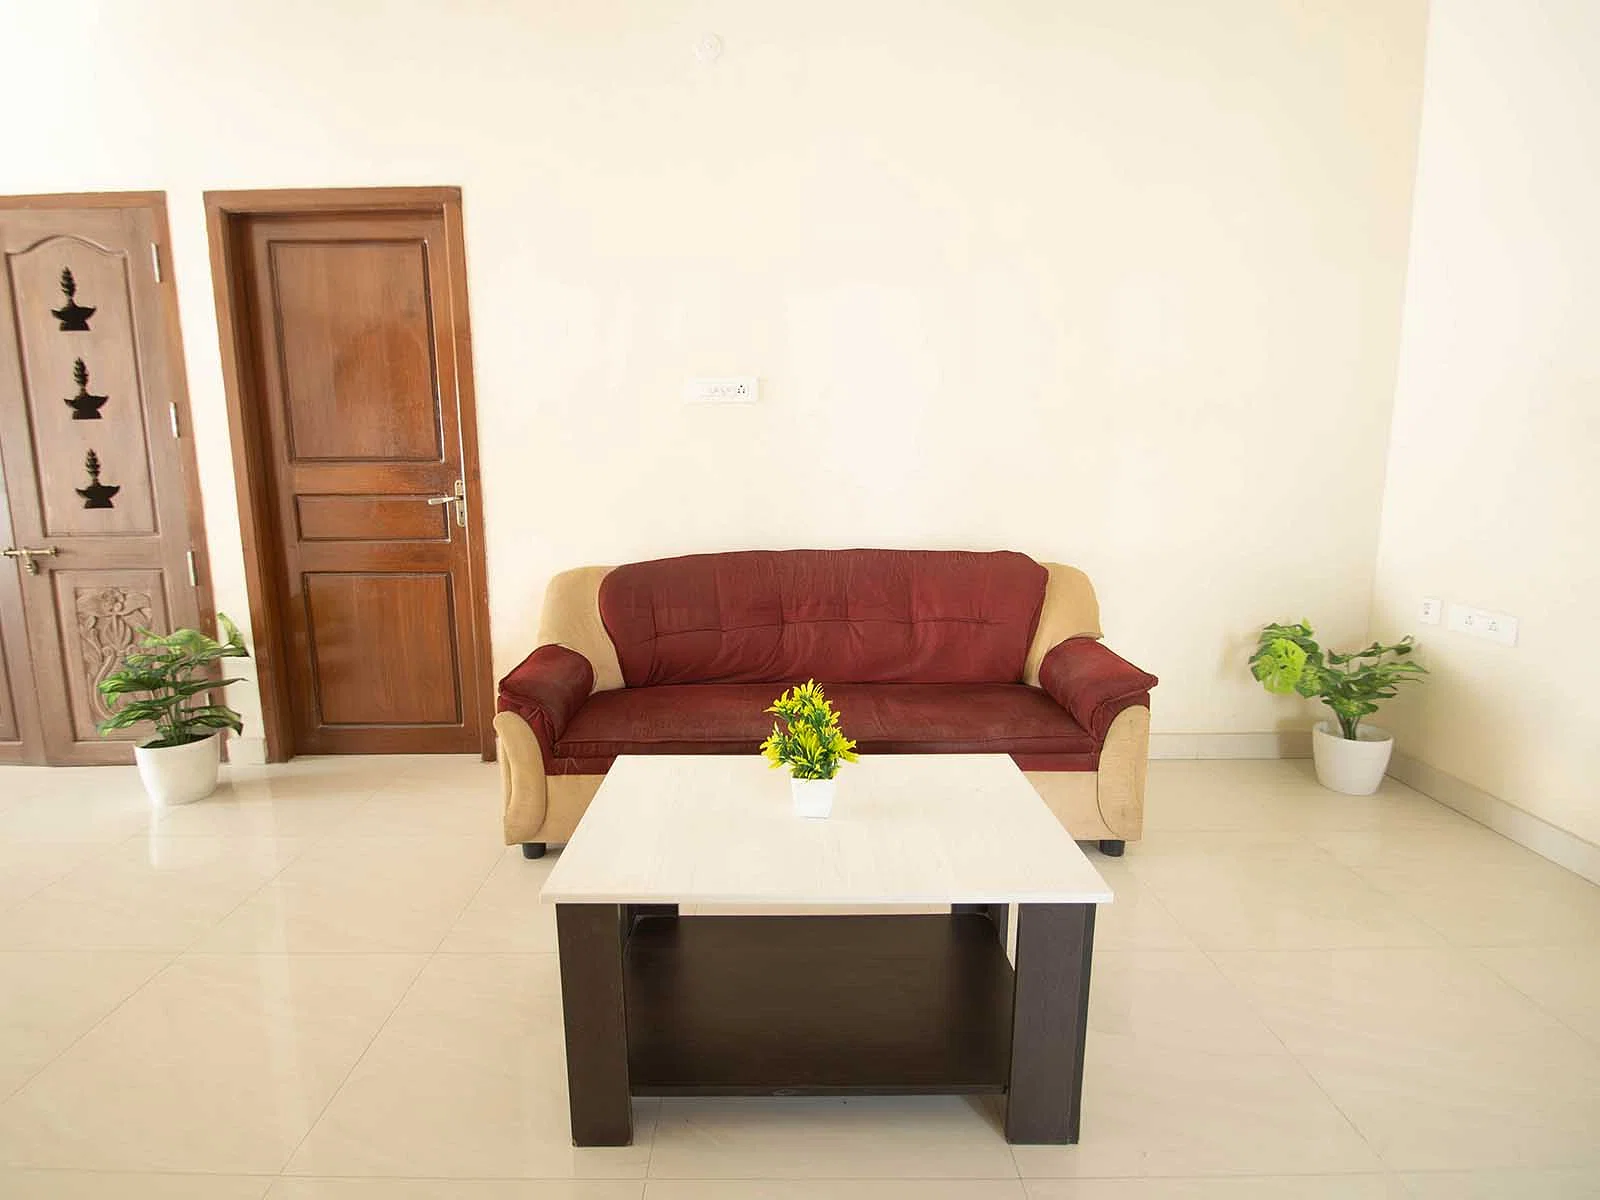 Fully furnished single/sharing rooms for rent in Velachery with no brokerage-apply fast-Zolo Belford